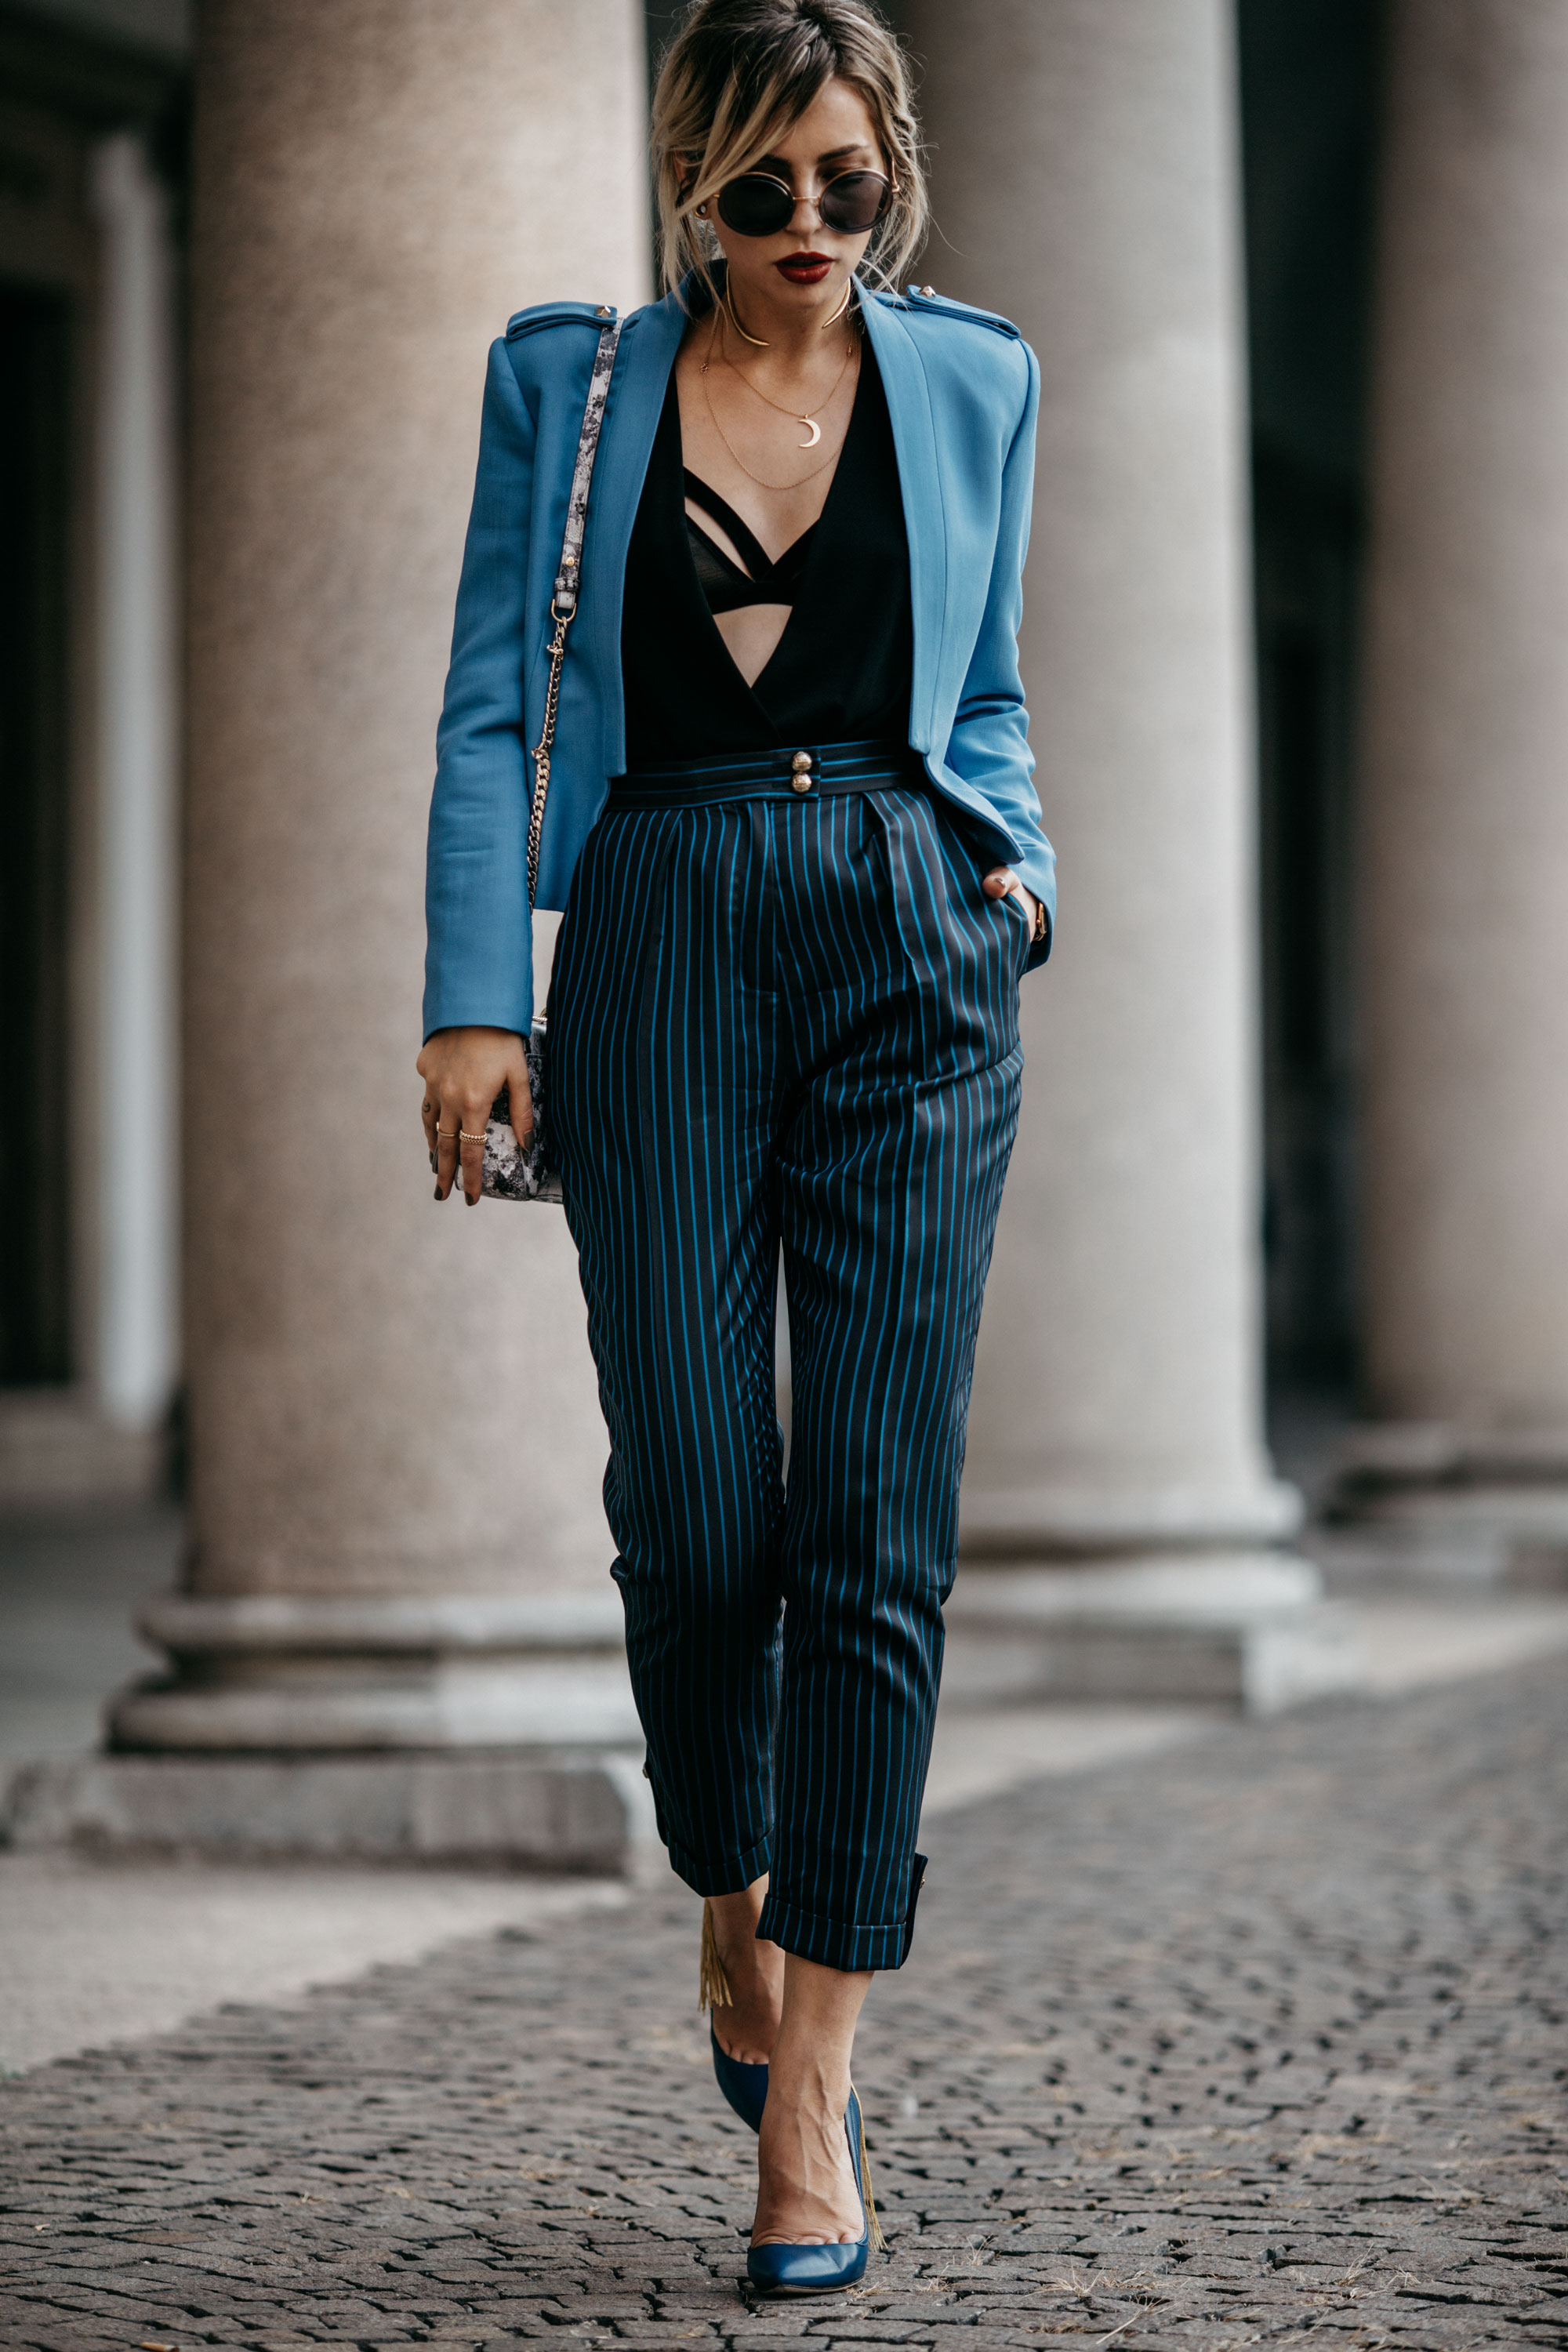 How to find your own style | Milan Fashion Week AW1617 | Elisabetta Franchi | style: classy, sexy, blau, blue, chic, italian